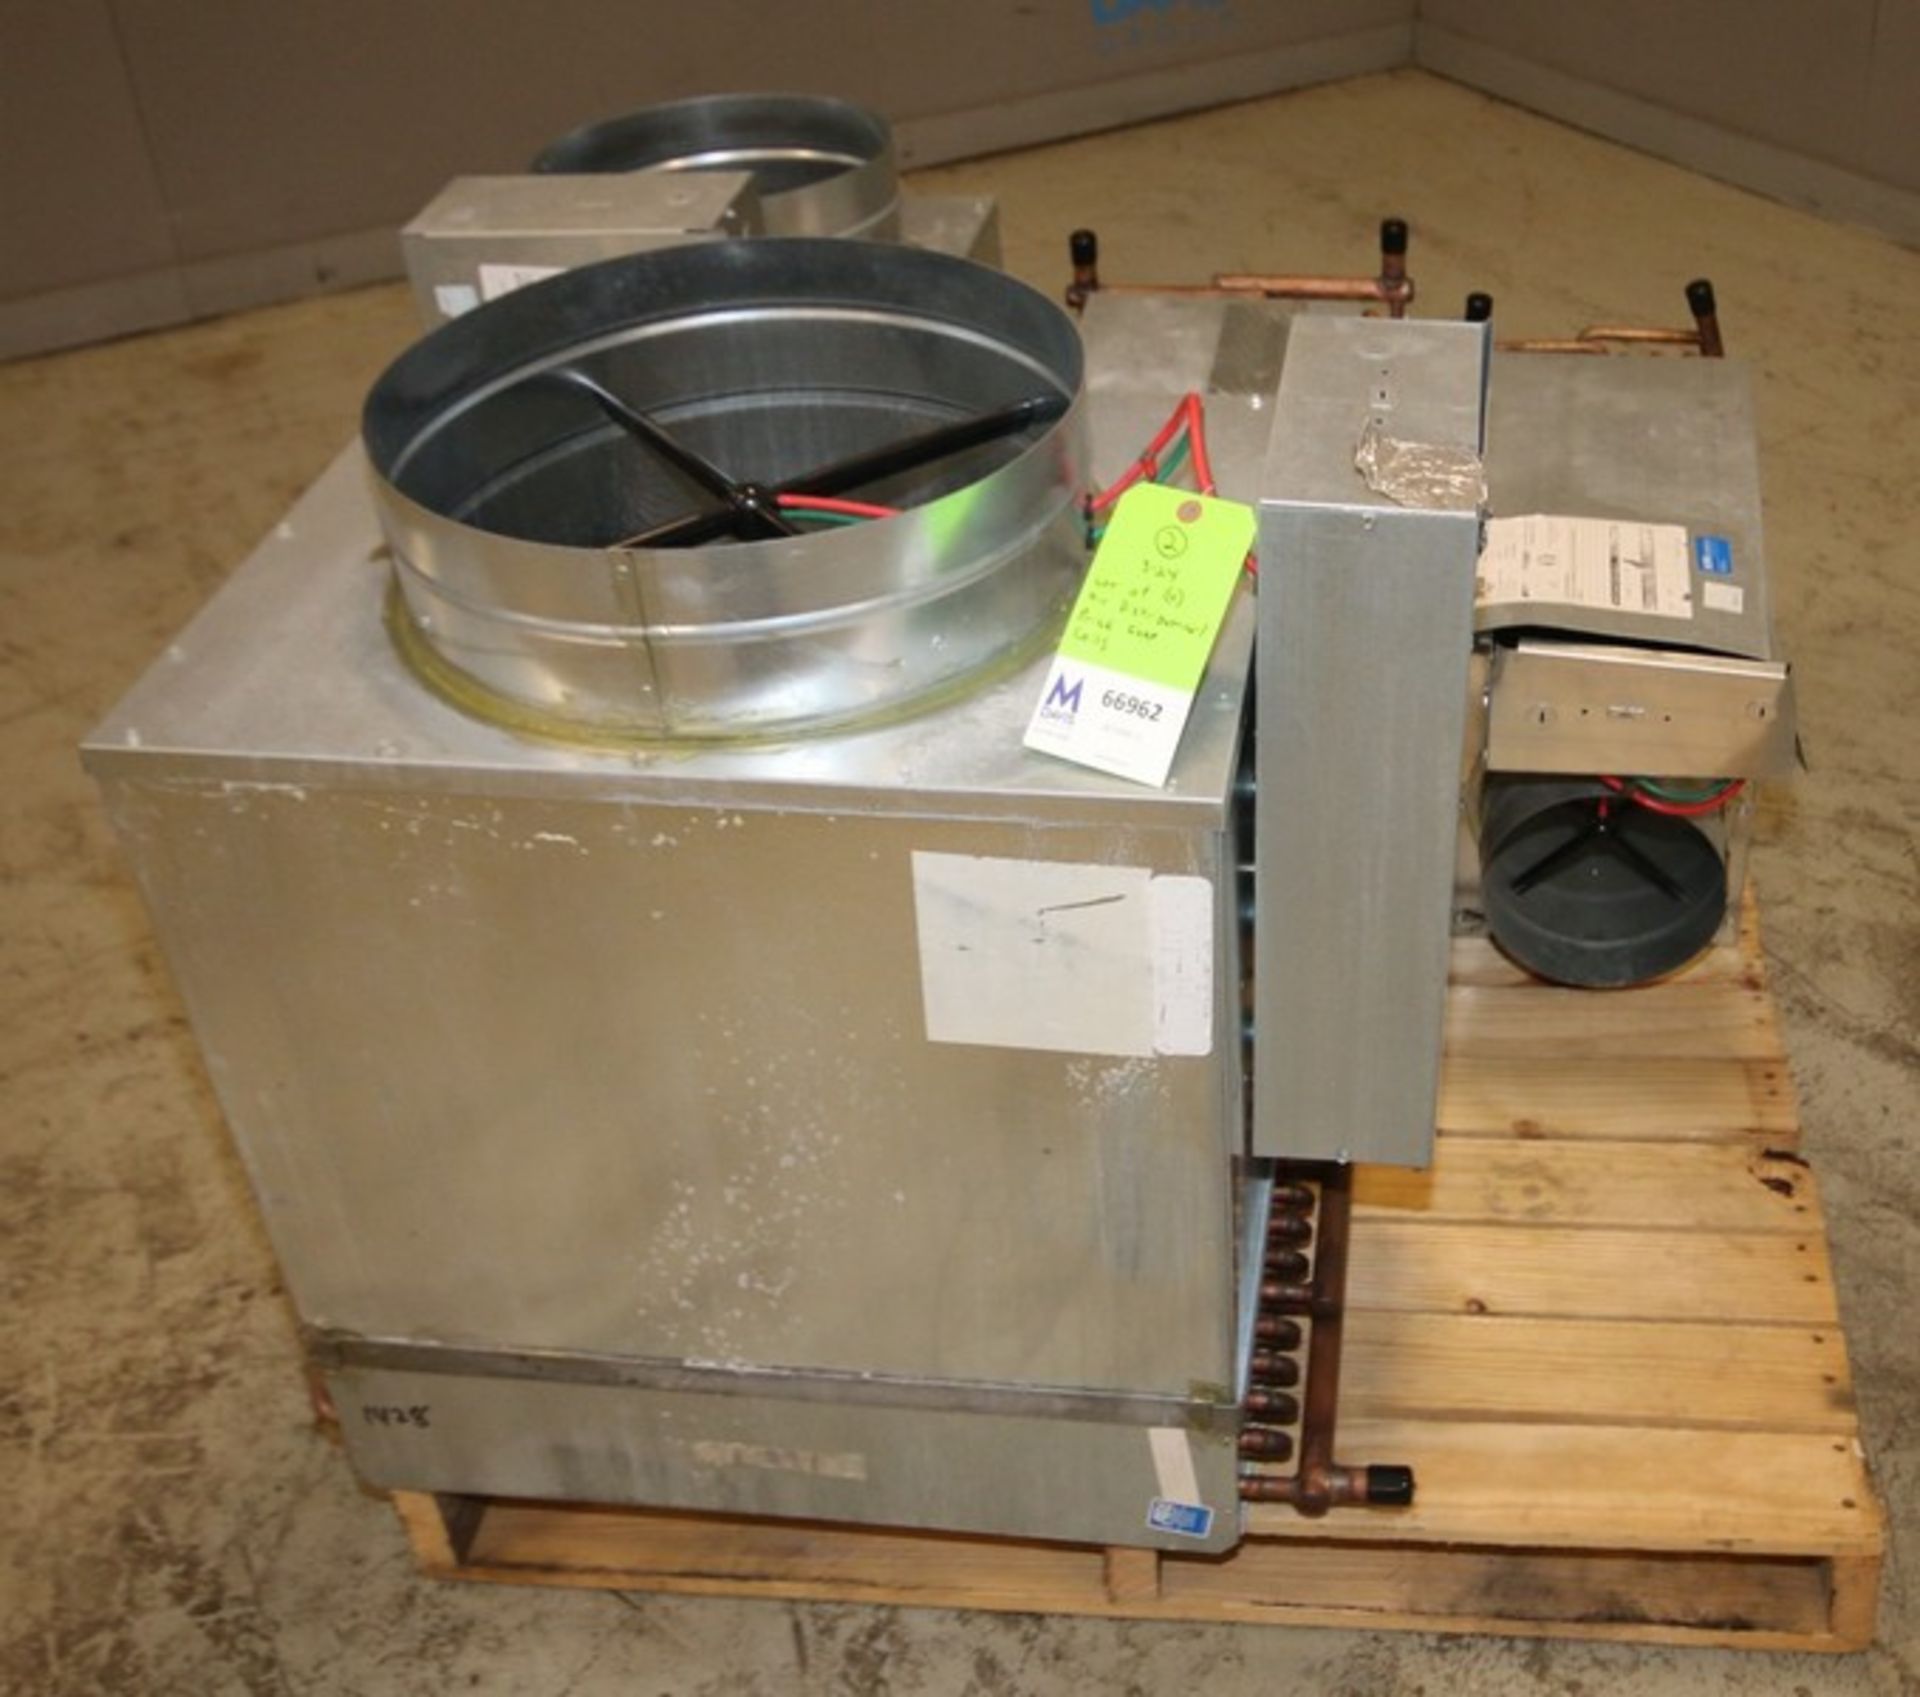 Lot of (4) Assorted Air Distribution / Price 16", 12", 8" & 10" Evaporator Coils, Order #560899,